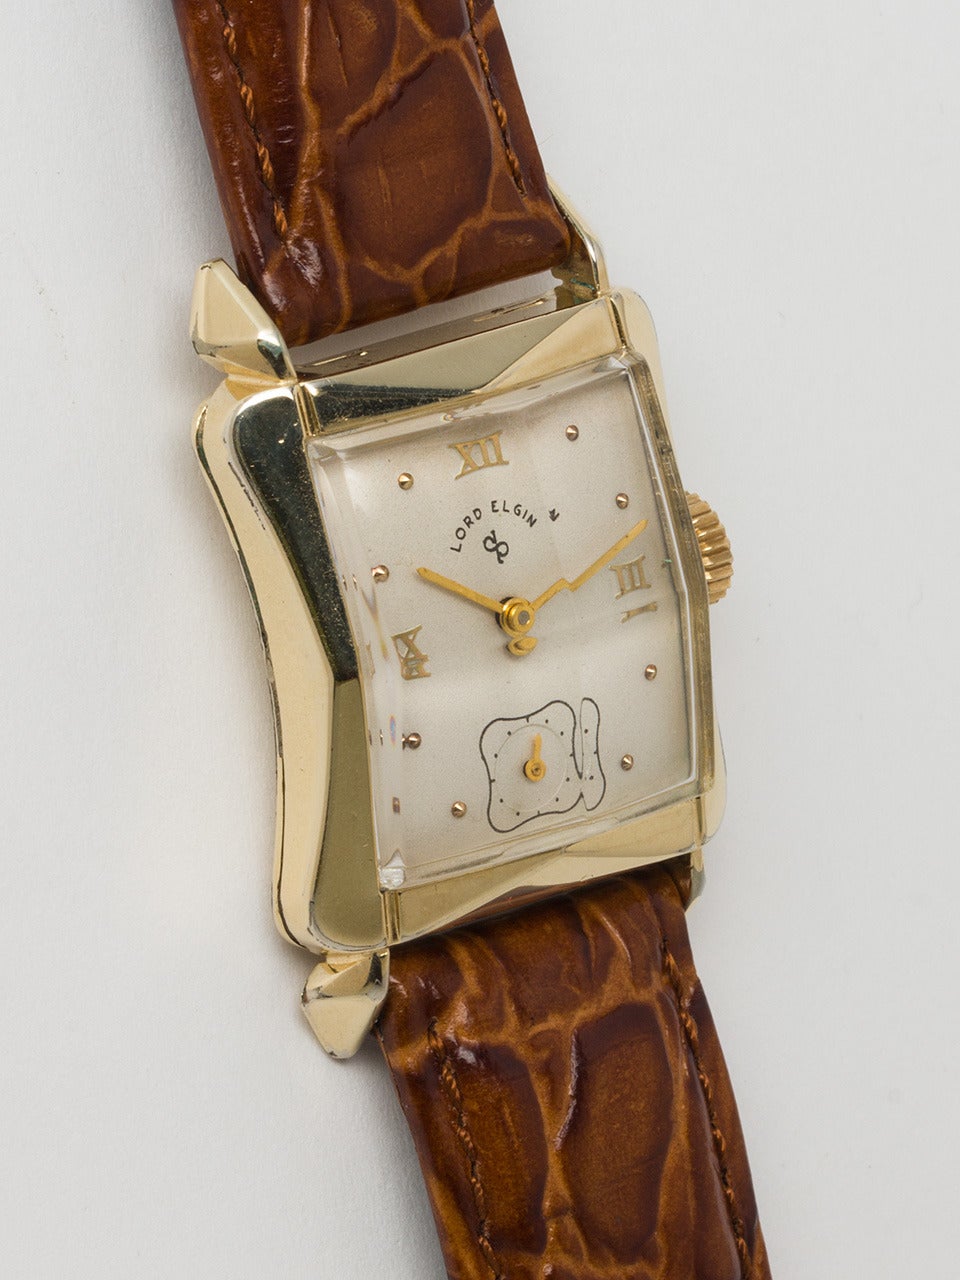 Lord Elgin Yellow Gold Filled Dress Model Wristwatch circa 1950s. Hour glass shaped case measuring 25x38mm with horn lugs and faceted rectangular crystal. With satin silvered dial with raised yellow gold Roman and dot markers. Powered by Elgin 670